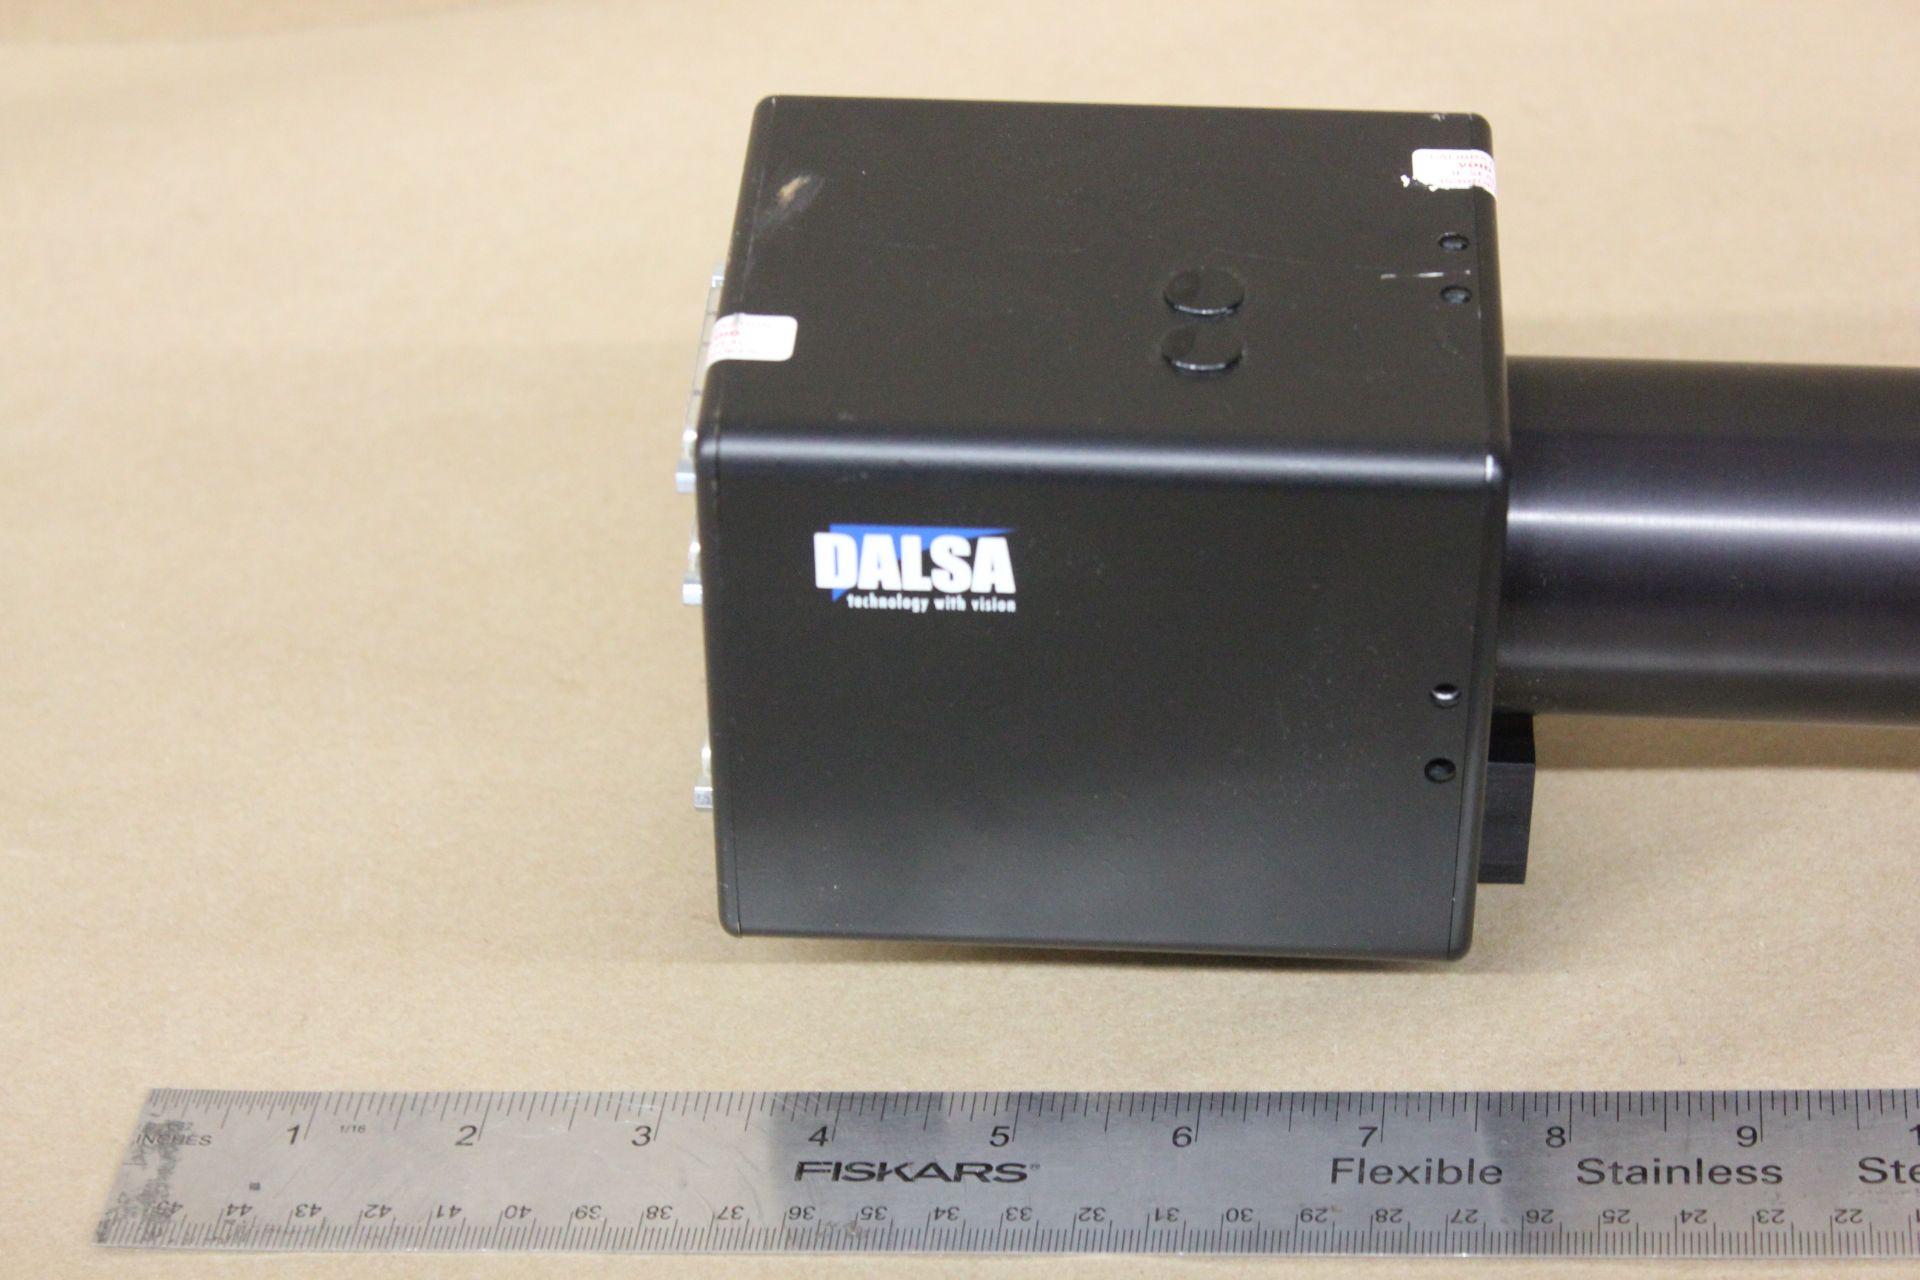 DALSA MACHINE VISION CAMERA WITH EXTENDED LENS - Image 2 of 5